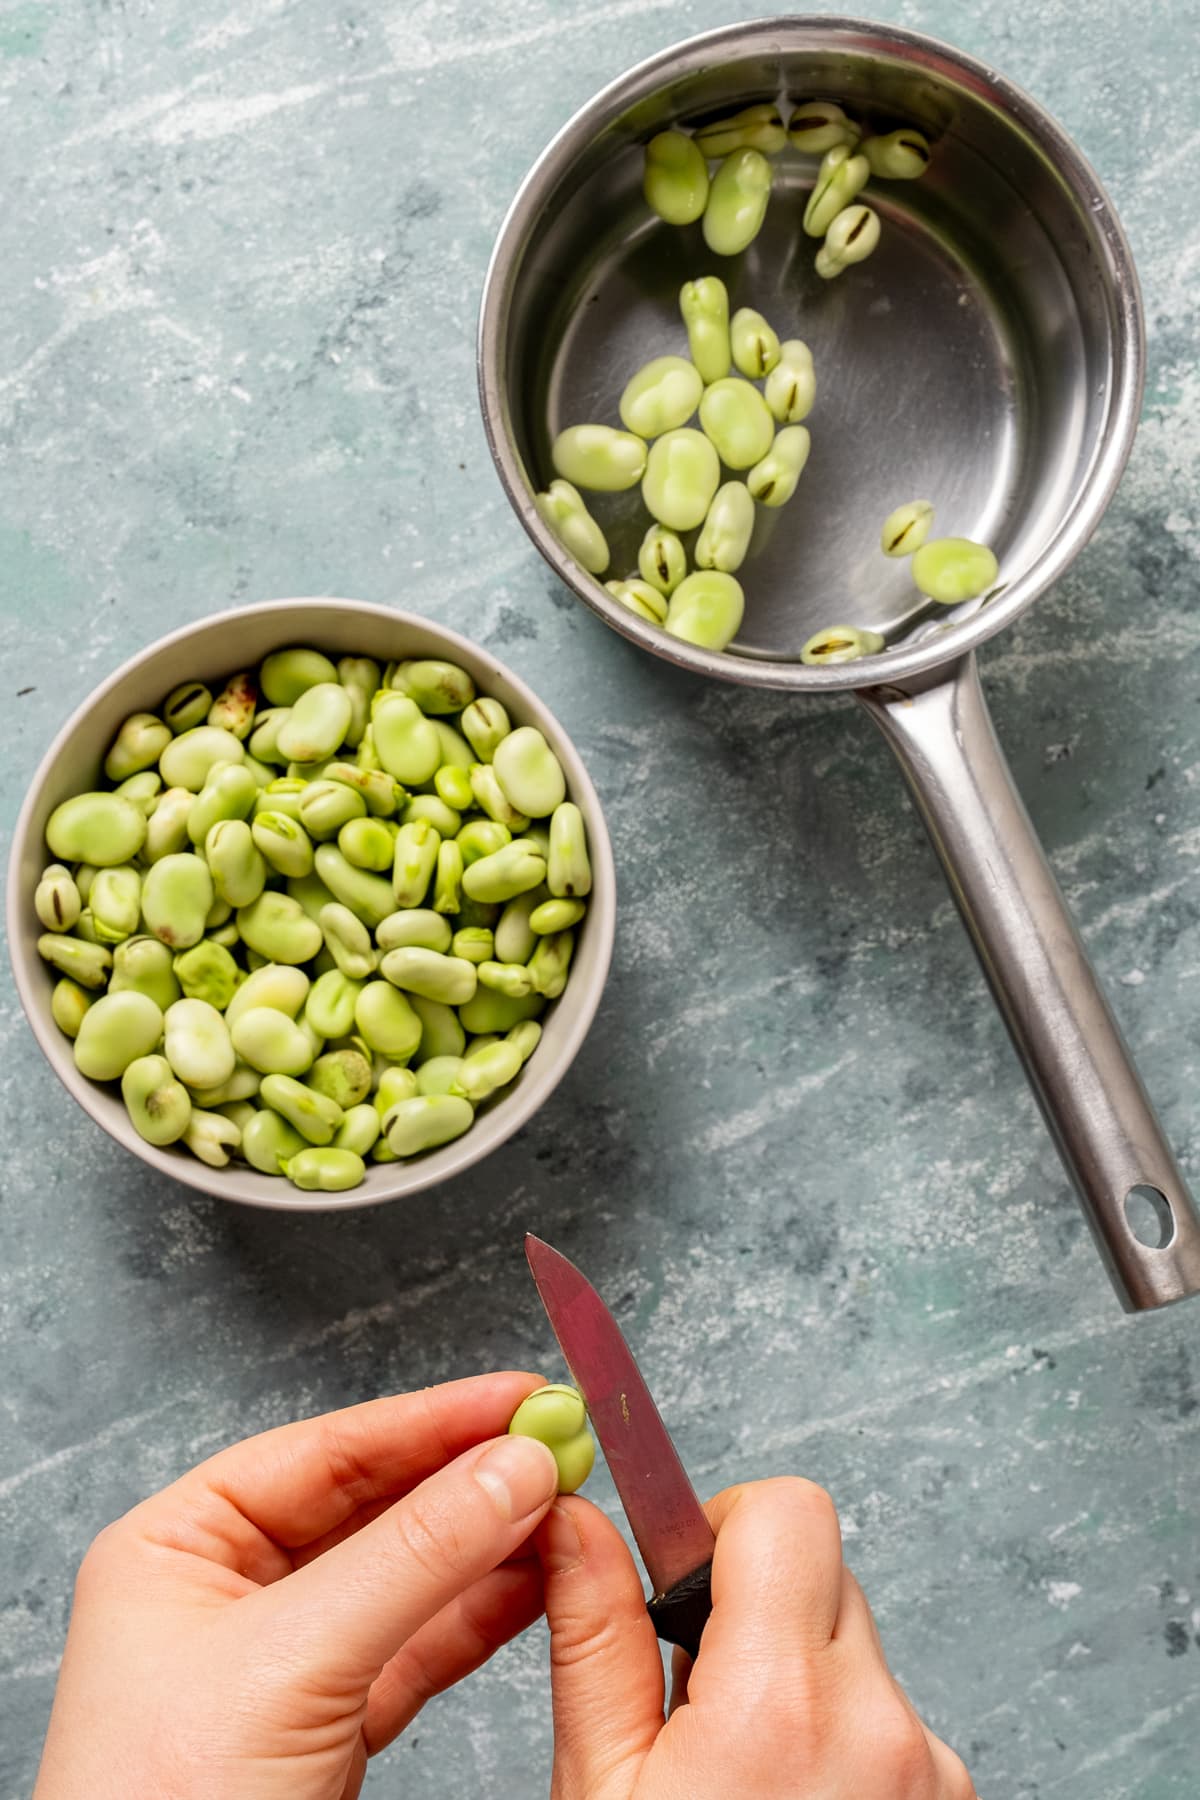 Hands making a slit on a fava bean removed from the pod, beans in a bowl and in a saucepan with hot water on the background.